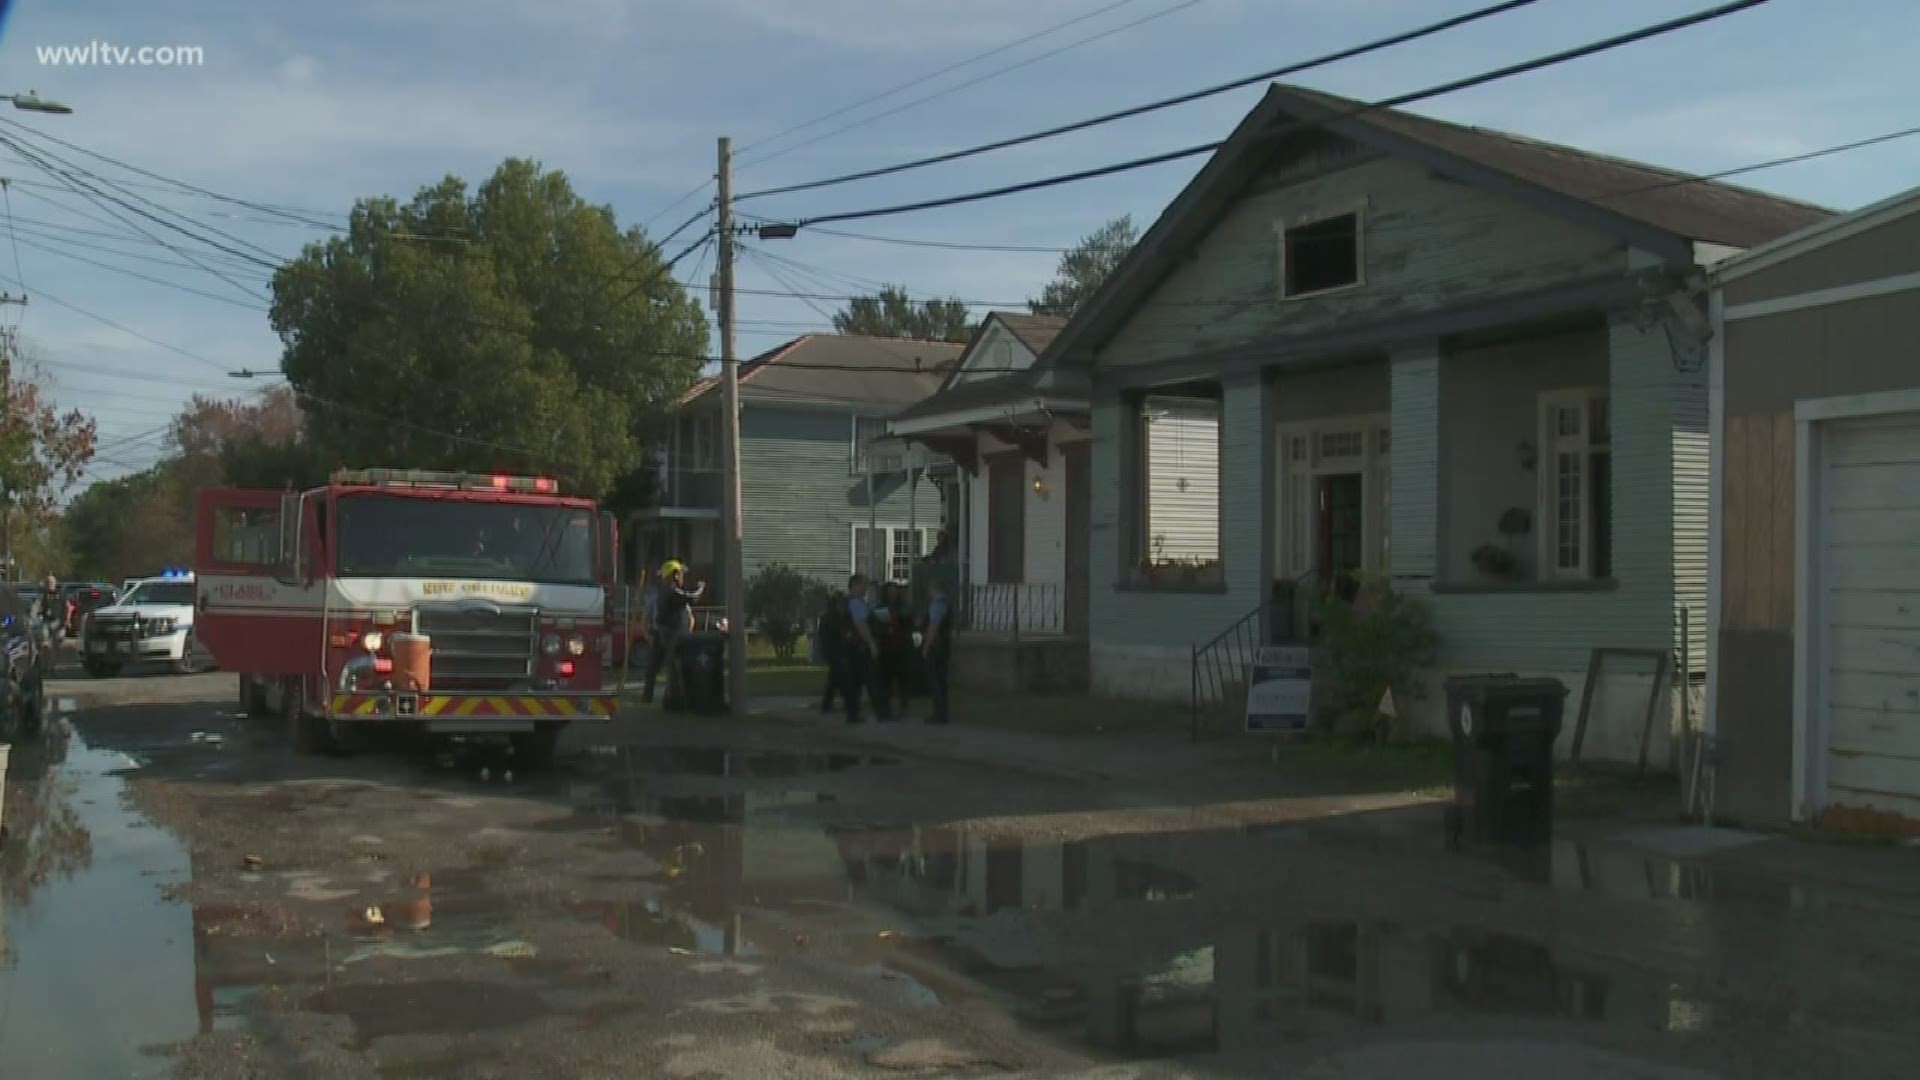 A 62-year-old woman was the only victim. Firefighters found her body in the living room after she succumbed to smoke inhalation.